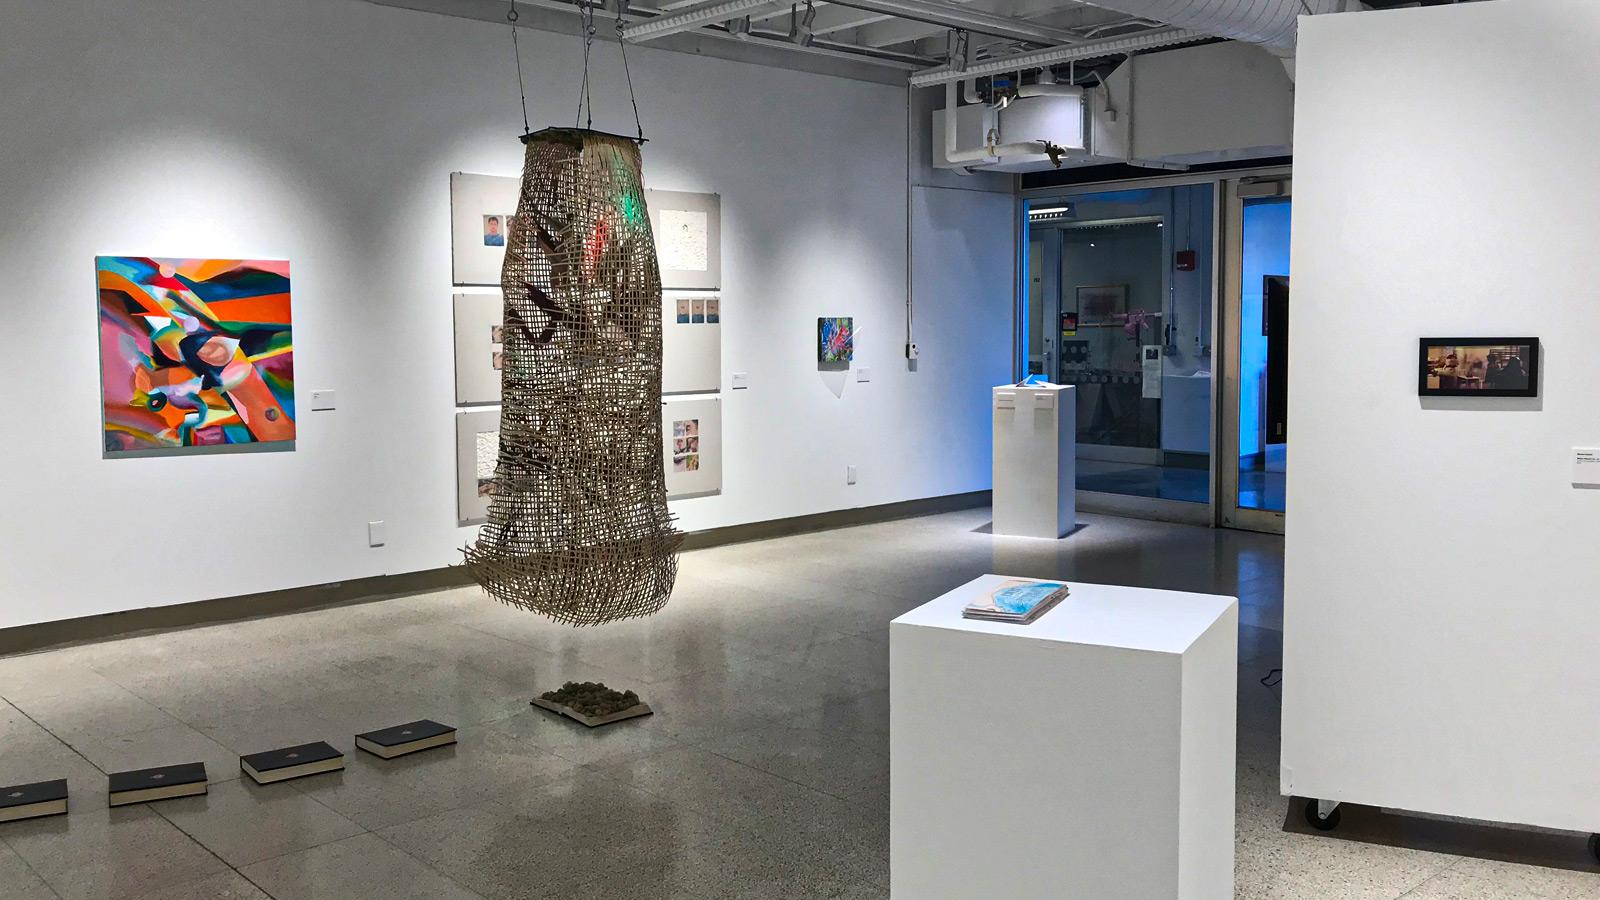 An exhibition at Hopkins Hall Gallery includes a hanging sculpture and and wall art.